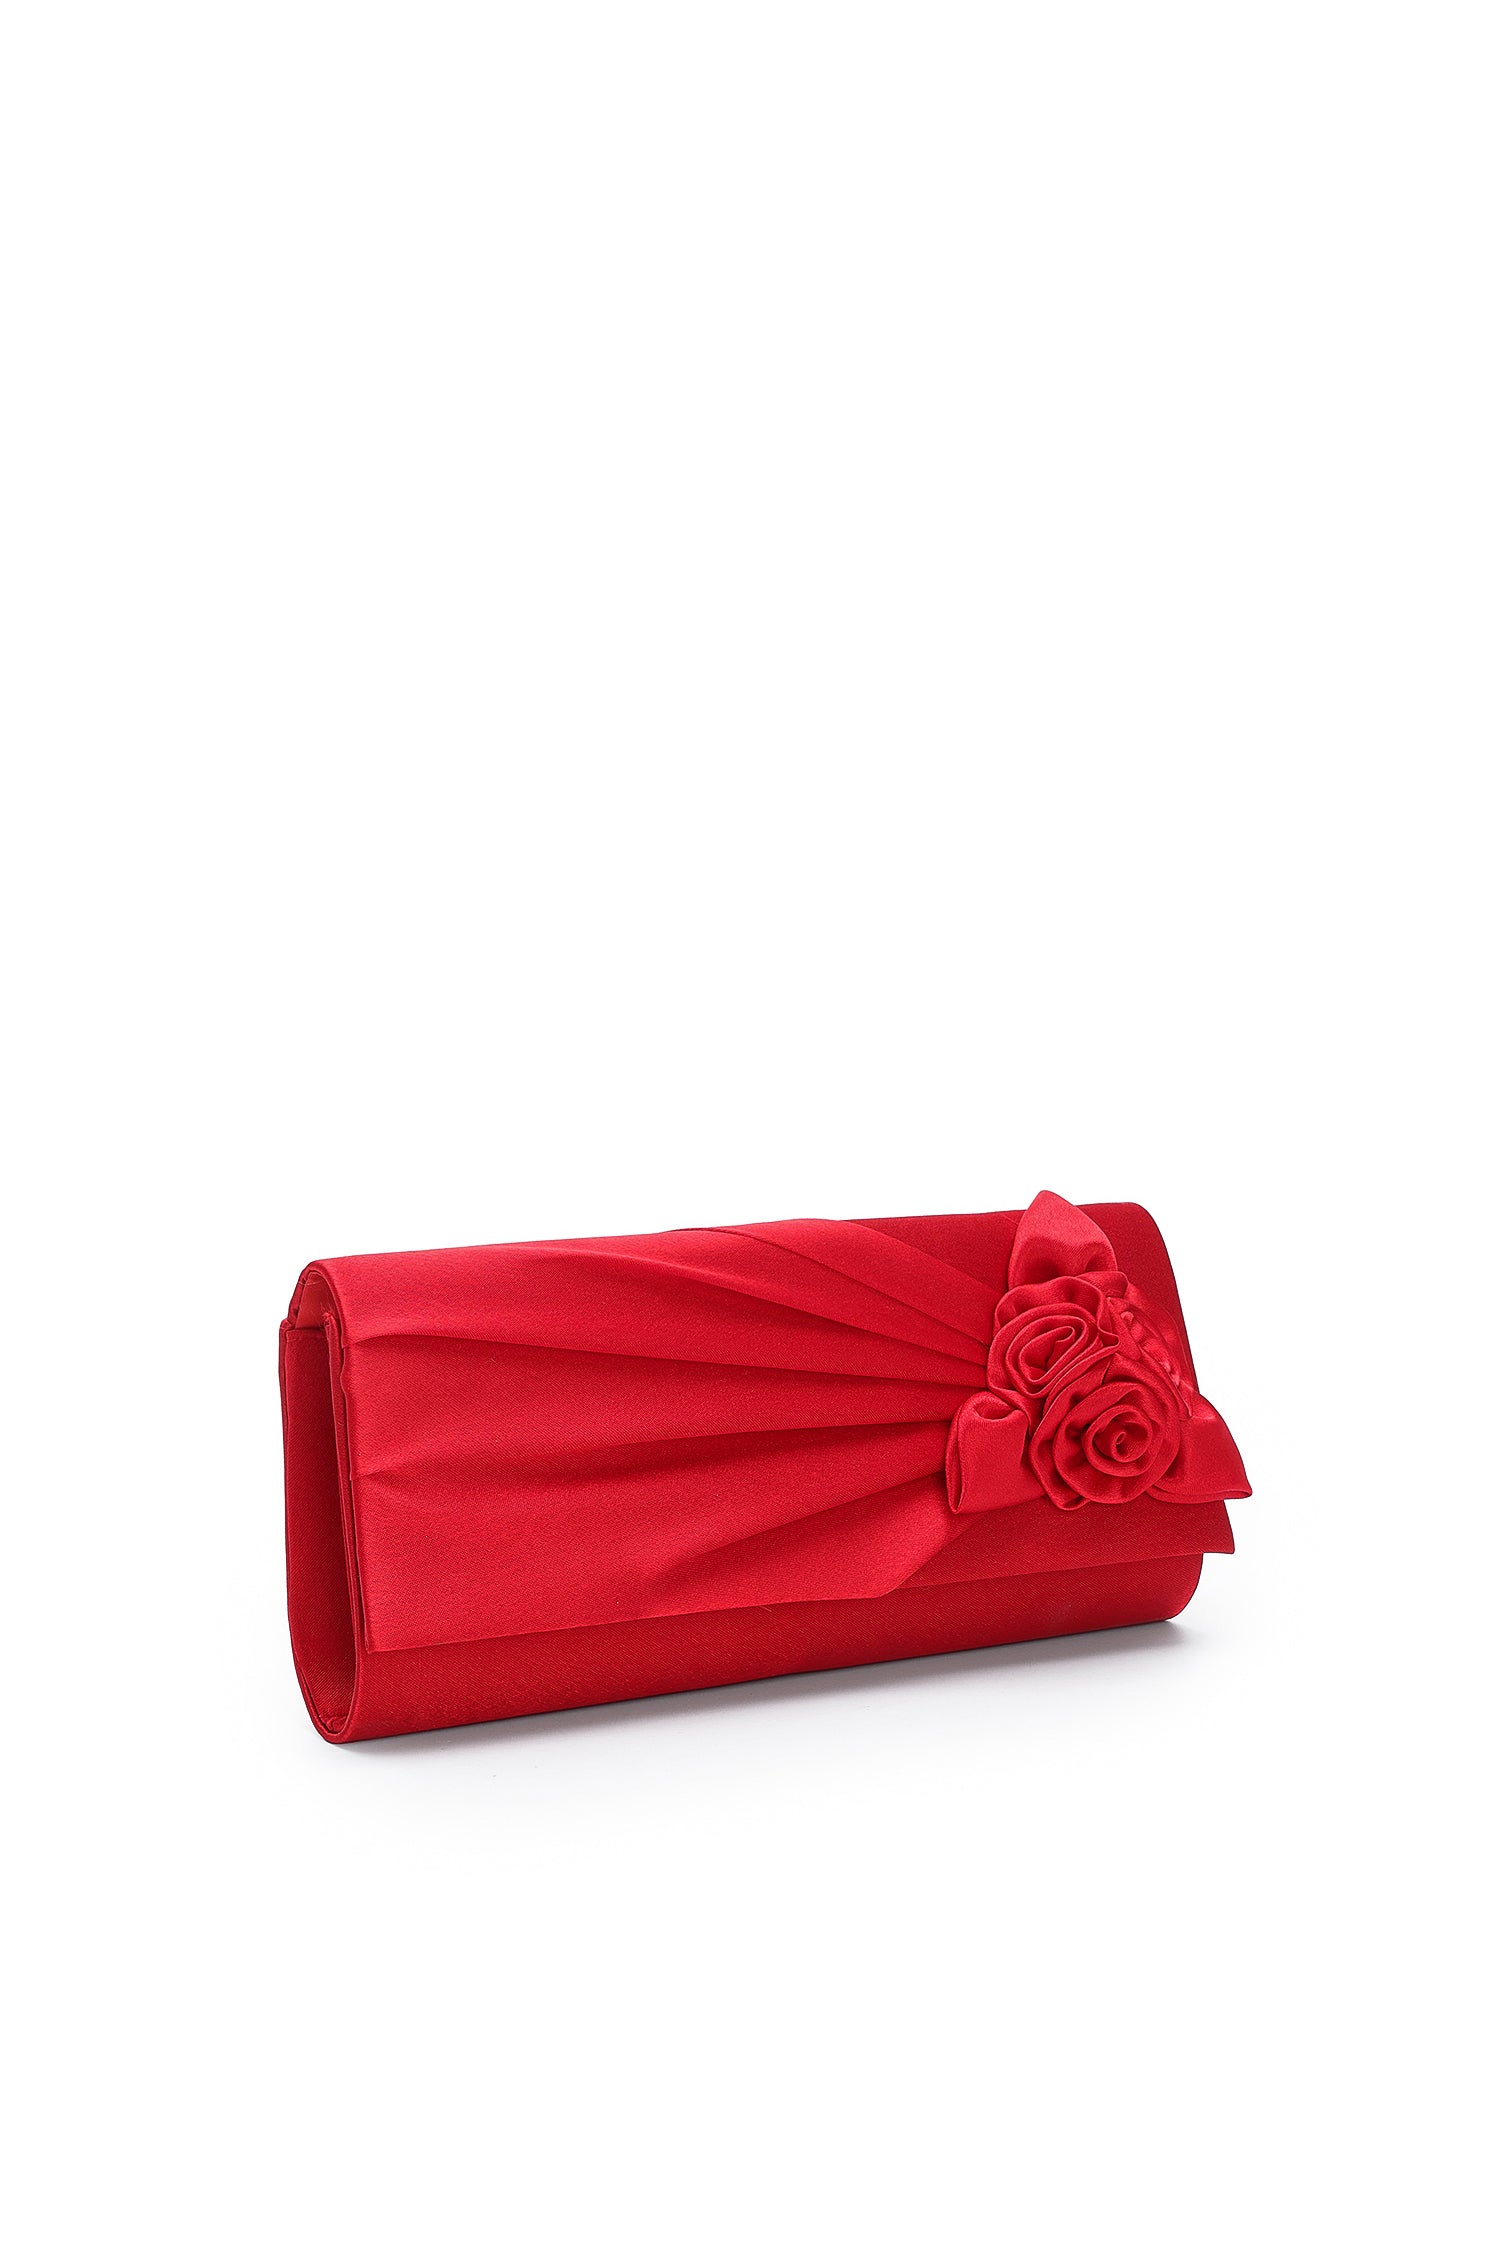 Susel Pleated Triangle Flower Clutch